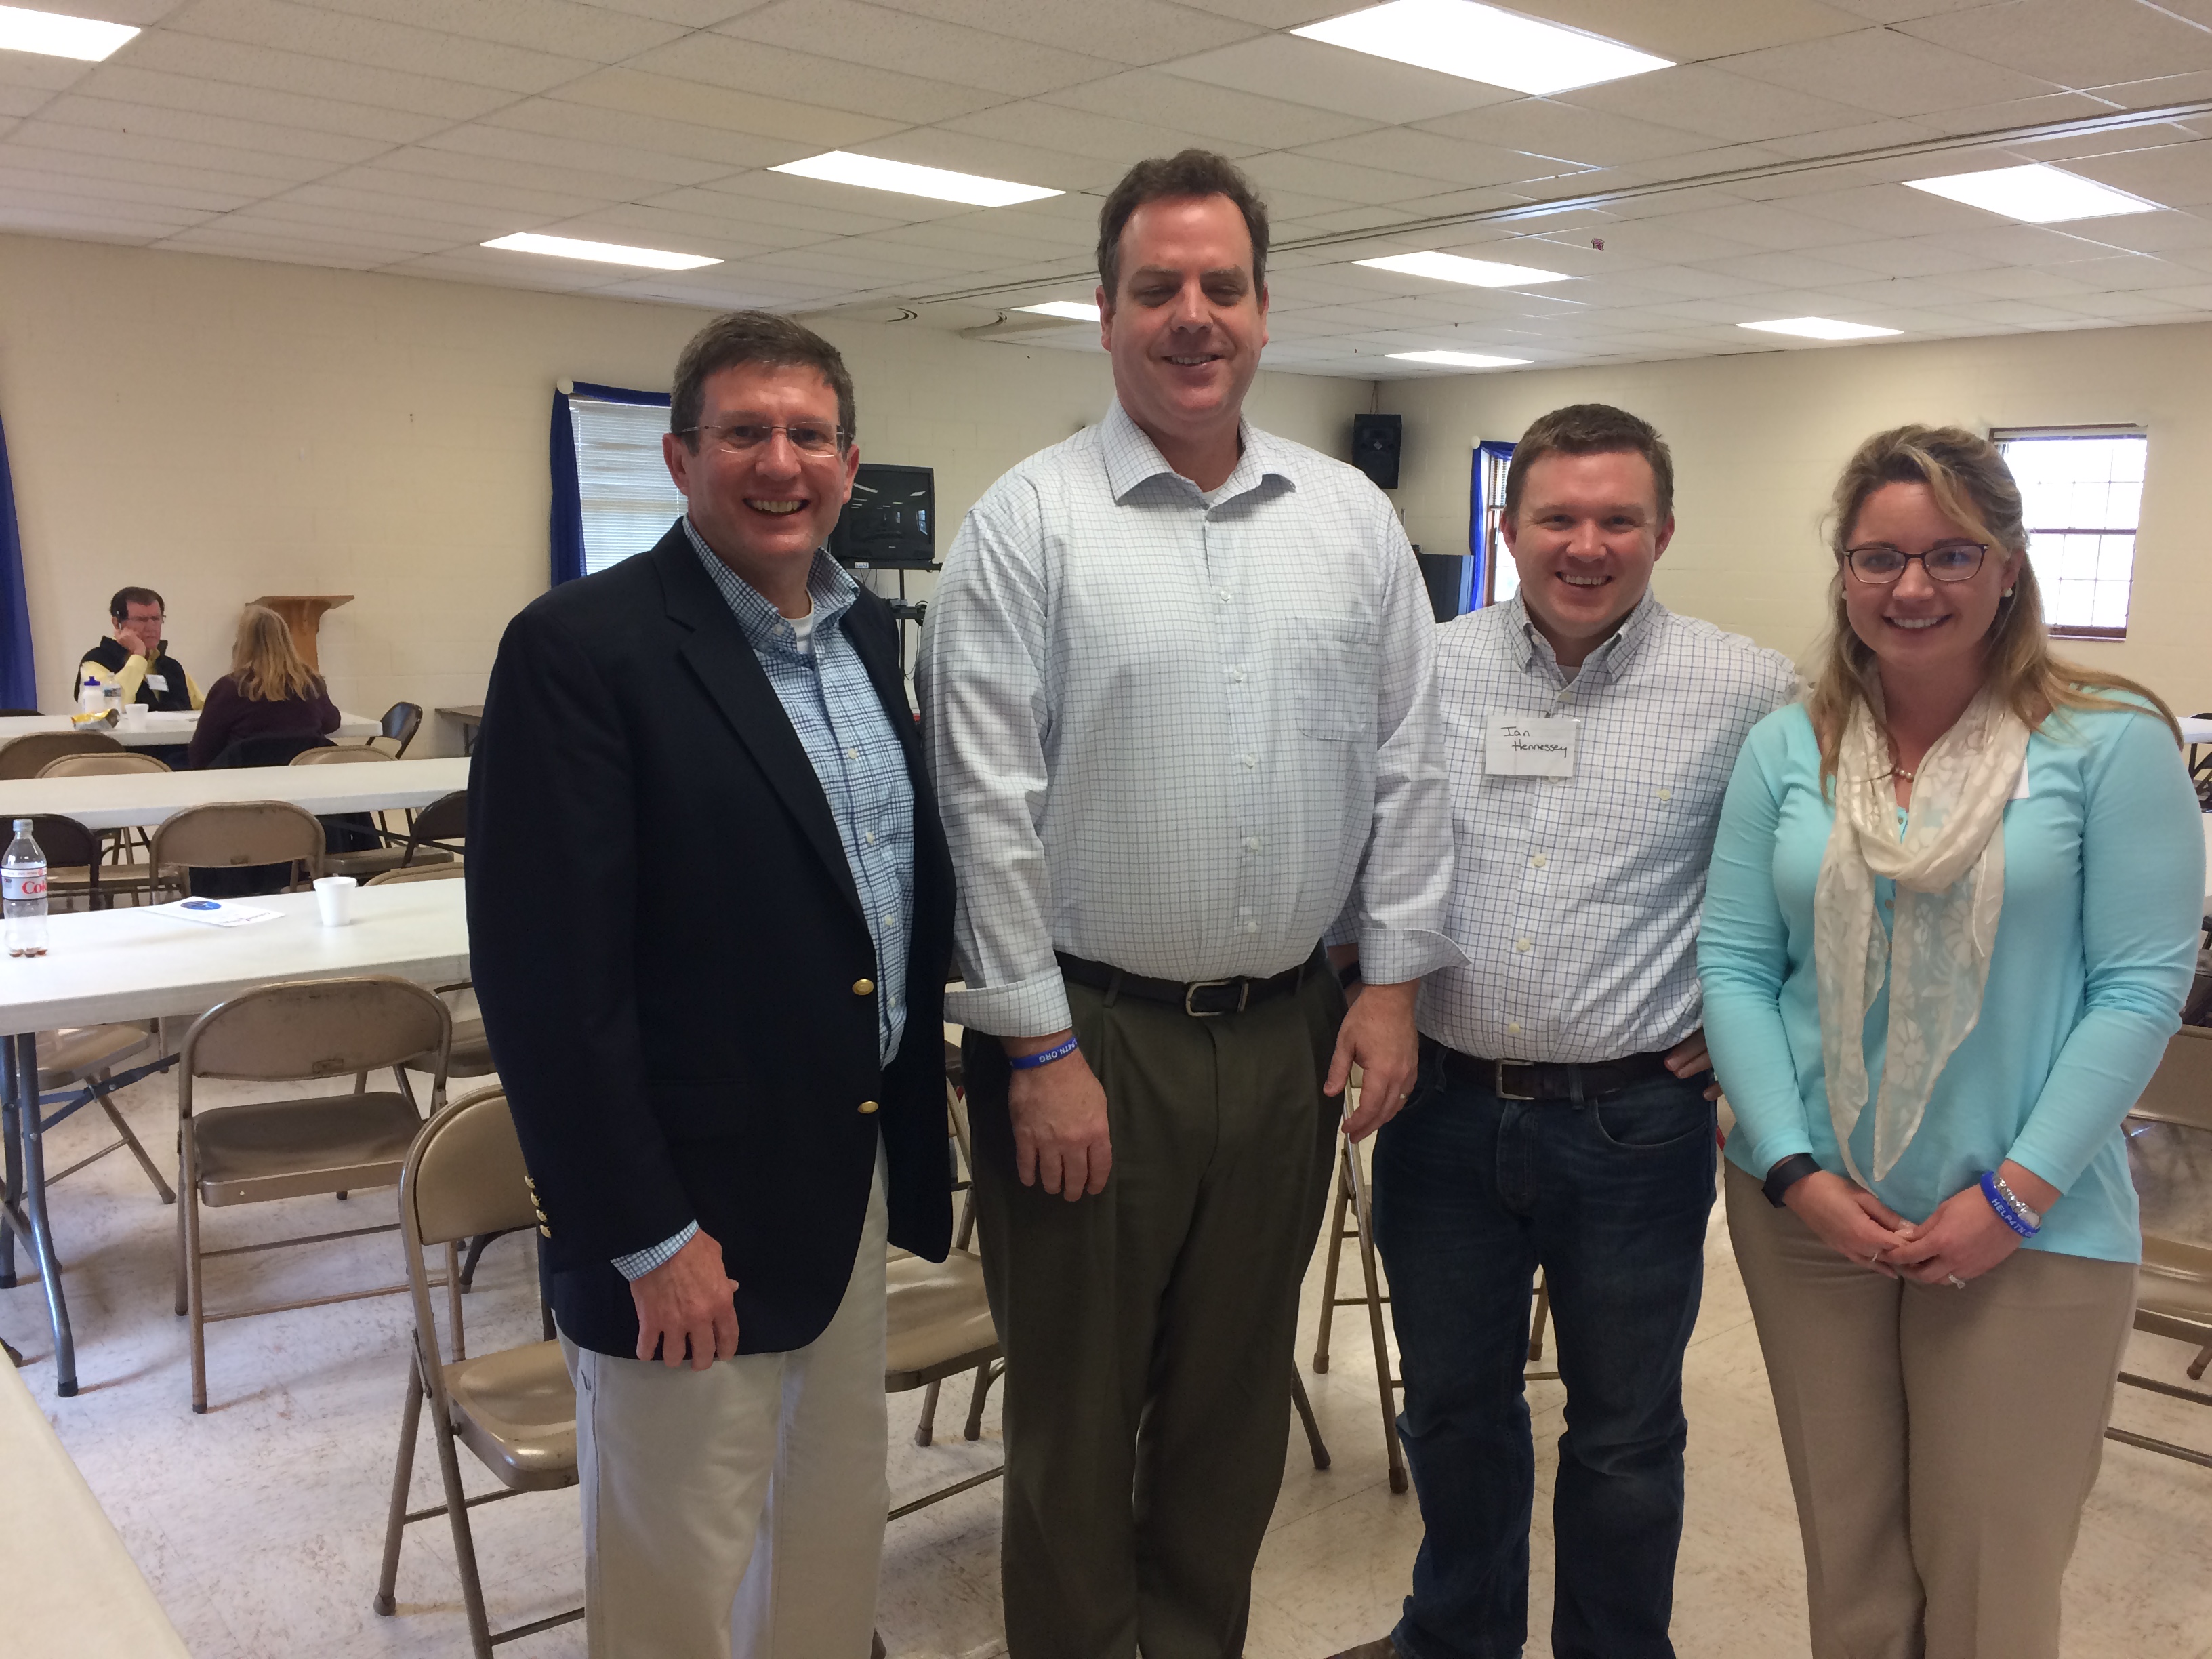 Bill Coley, Jason Long, Ian Hennessy and Katie Goodner at a legal clinic at Colonial Heights UMC. on April 1, 2017